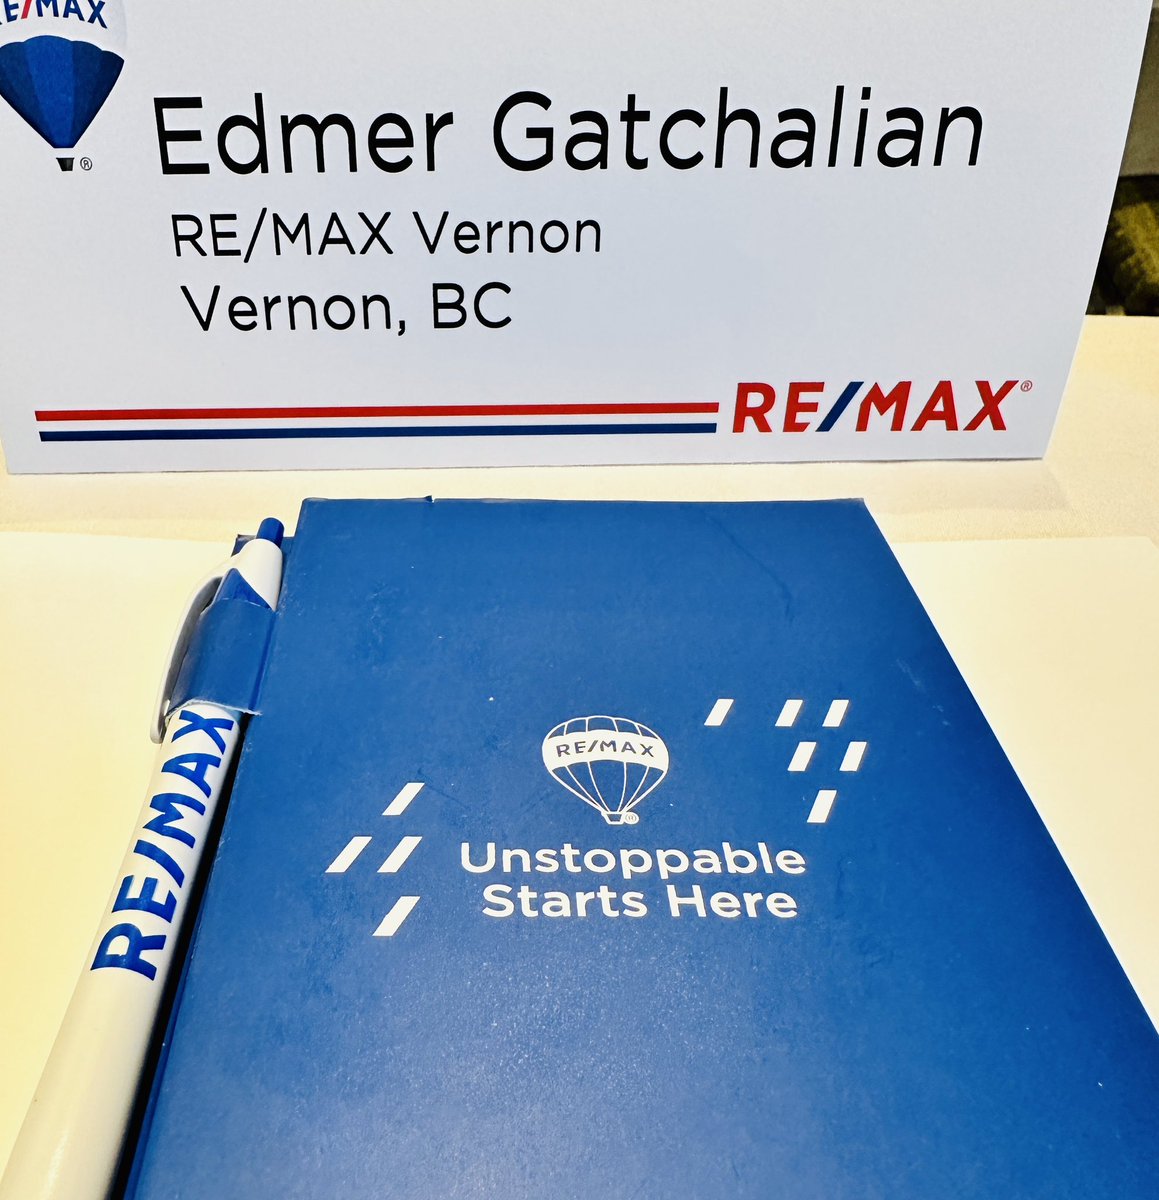 Excited to help more families find their dream homes with RE/MAX! 🏡 Unstoppable starts here. 👇👇👇

edmer.therightagents.ca

#VernonRealEstate #REMAXUnstoppable #HomebuyingJourney #PinoyRealtor #firsttimehomebuyer #okanaganrealestate